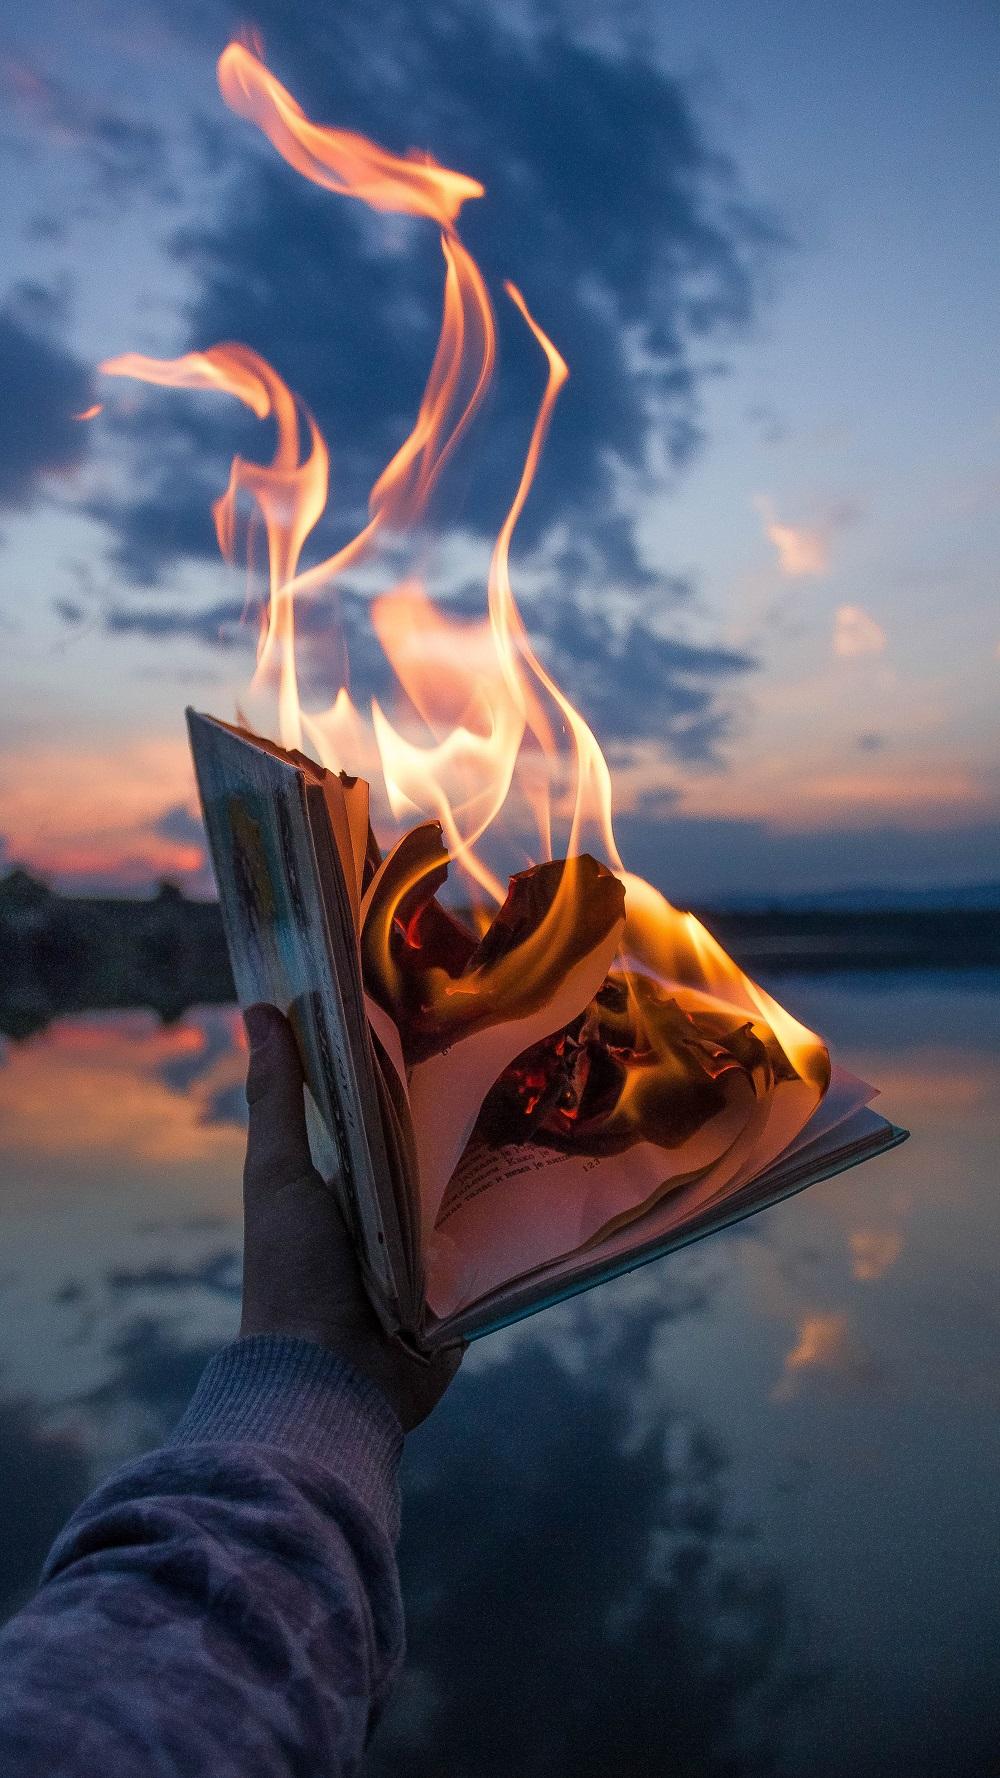 Person holding a book on fire - Fire, flames